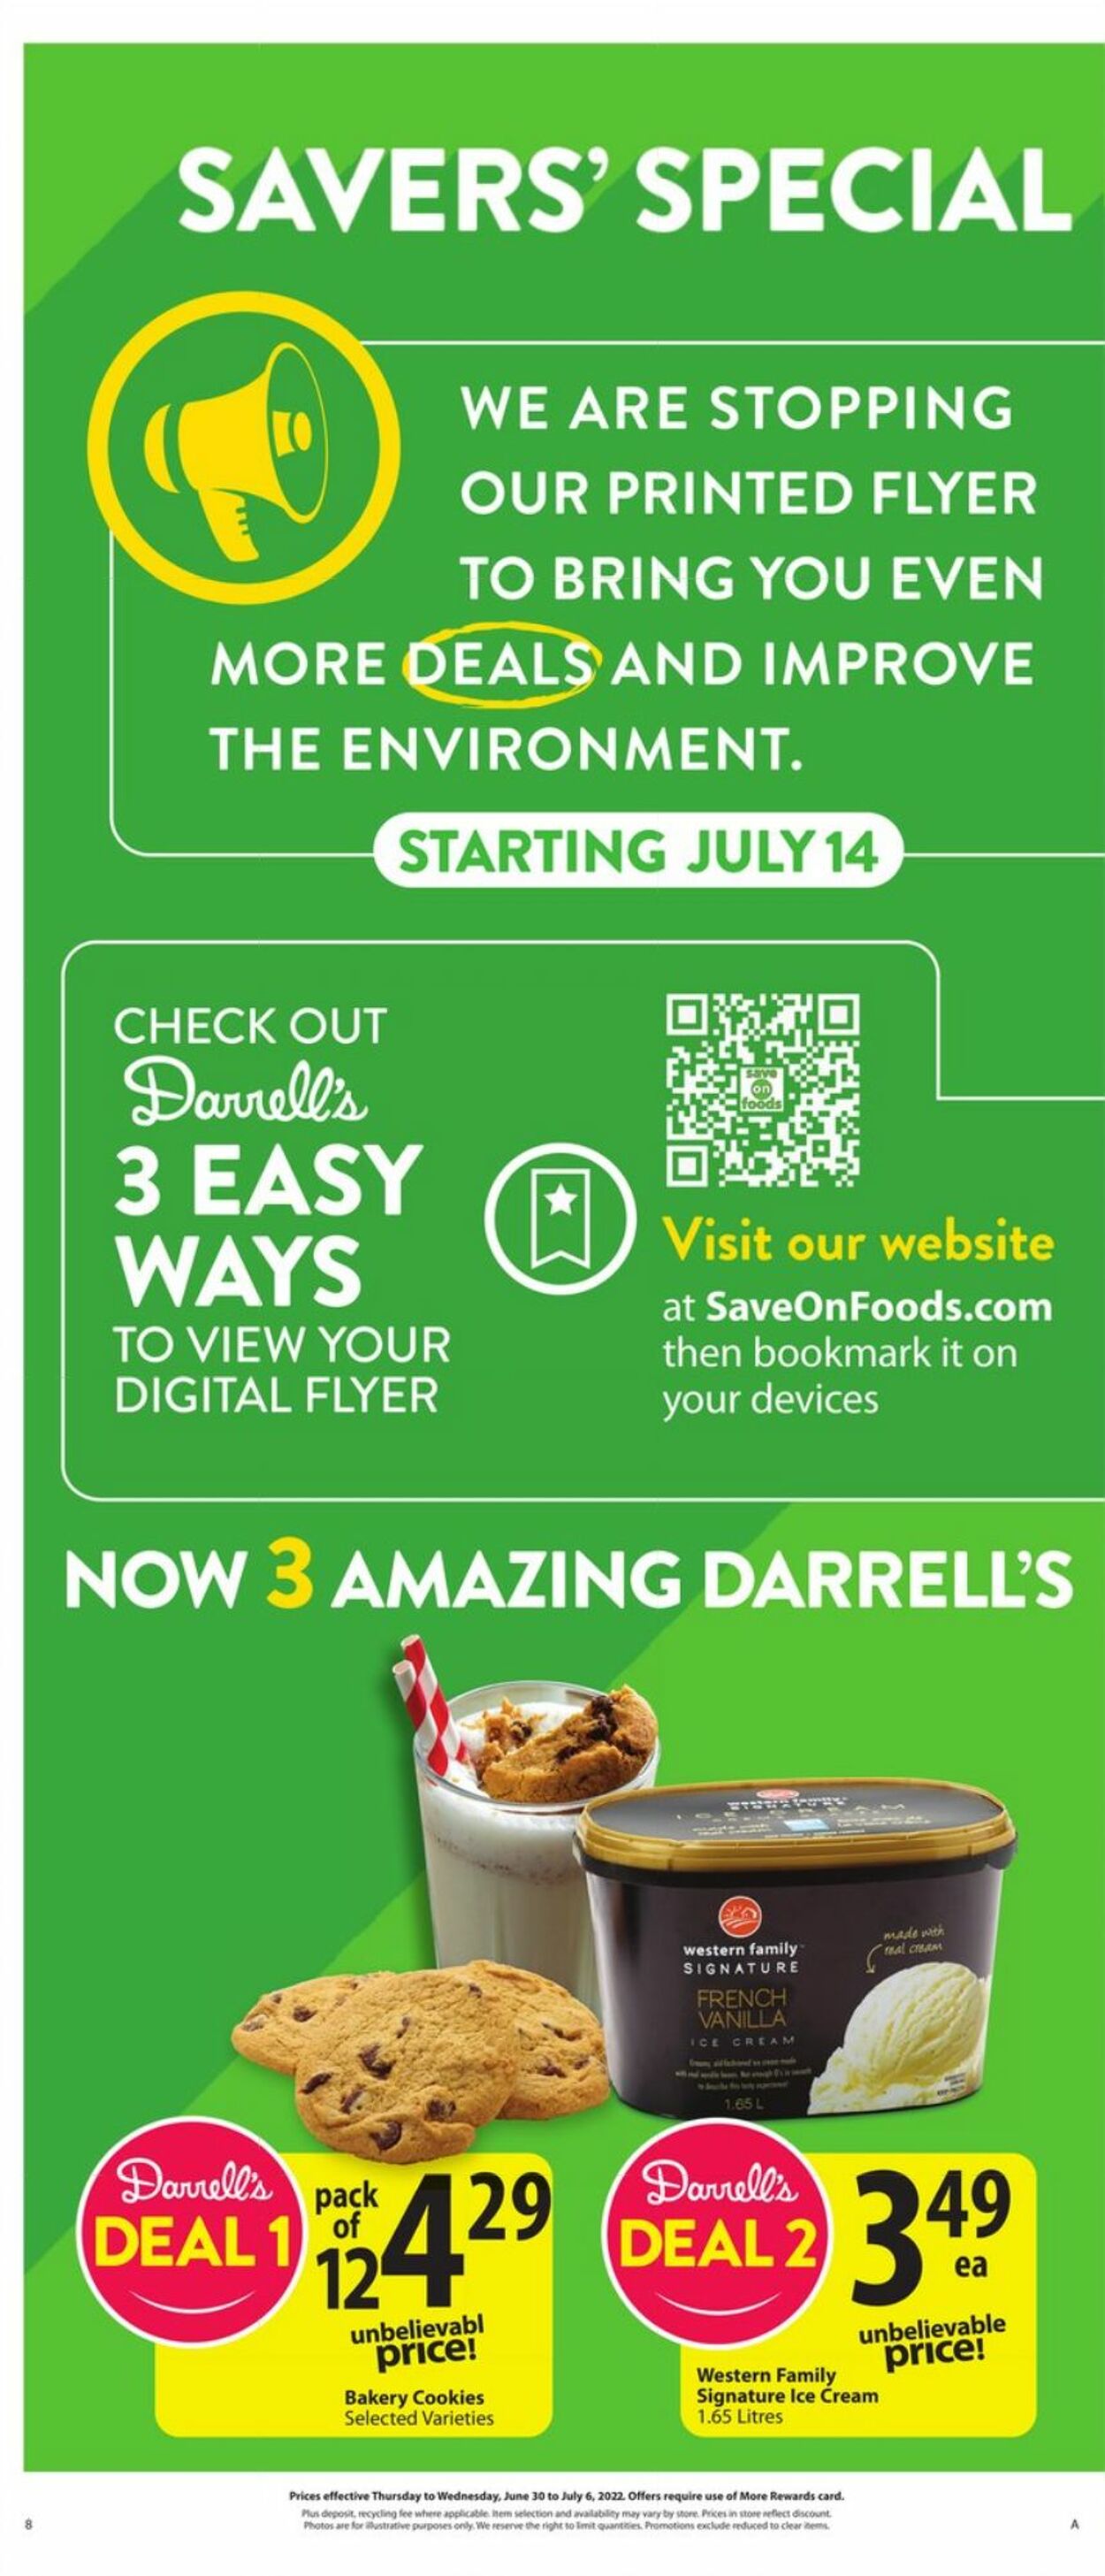 Flyer Save-On-Foods 30.06.2022 - 06.07.2022